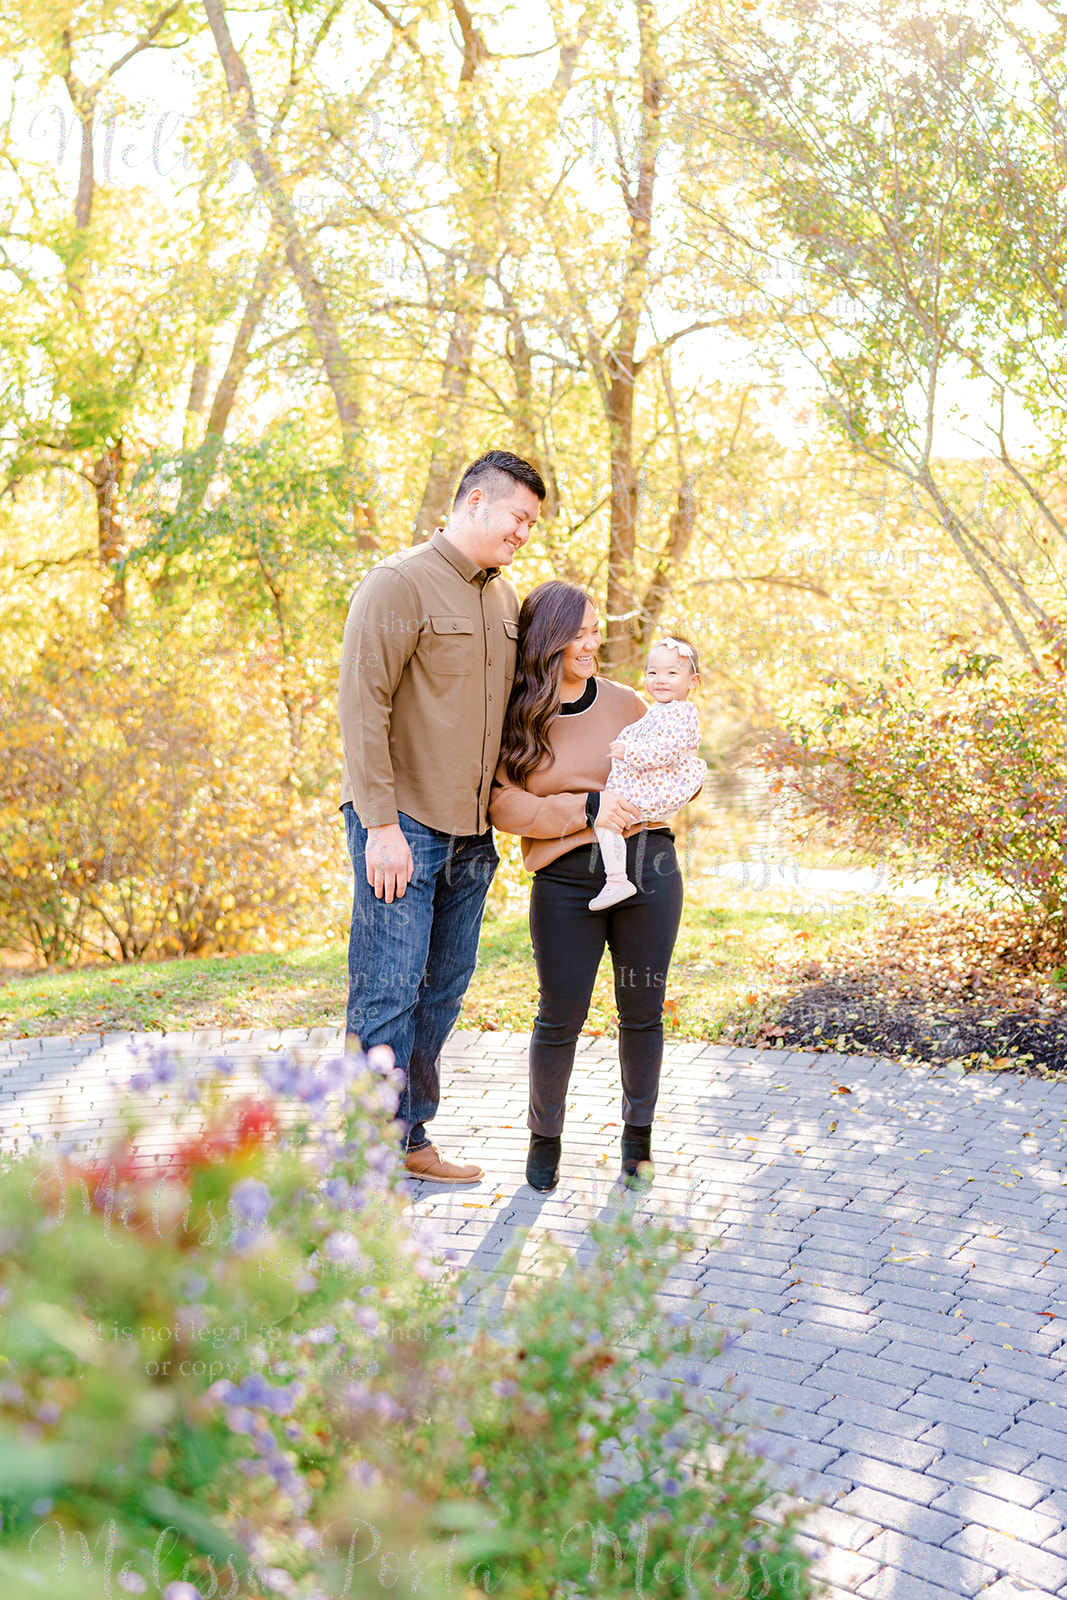 Family smiles at their baby as she smiles at the camera with fall foliage as a backdrop in Howard County, MD